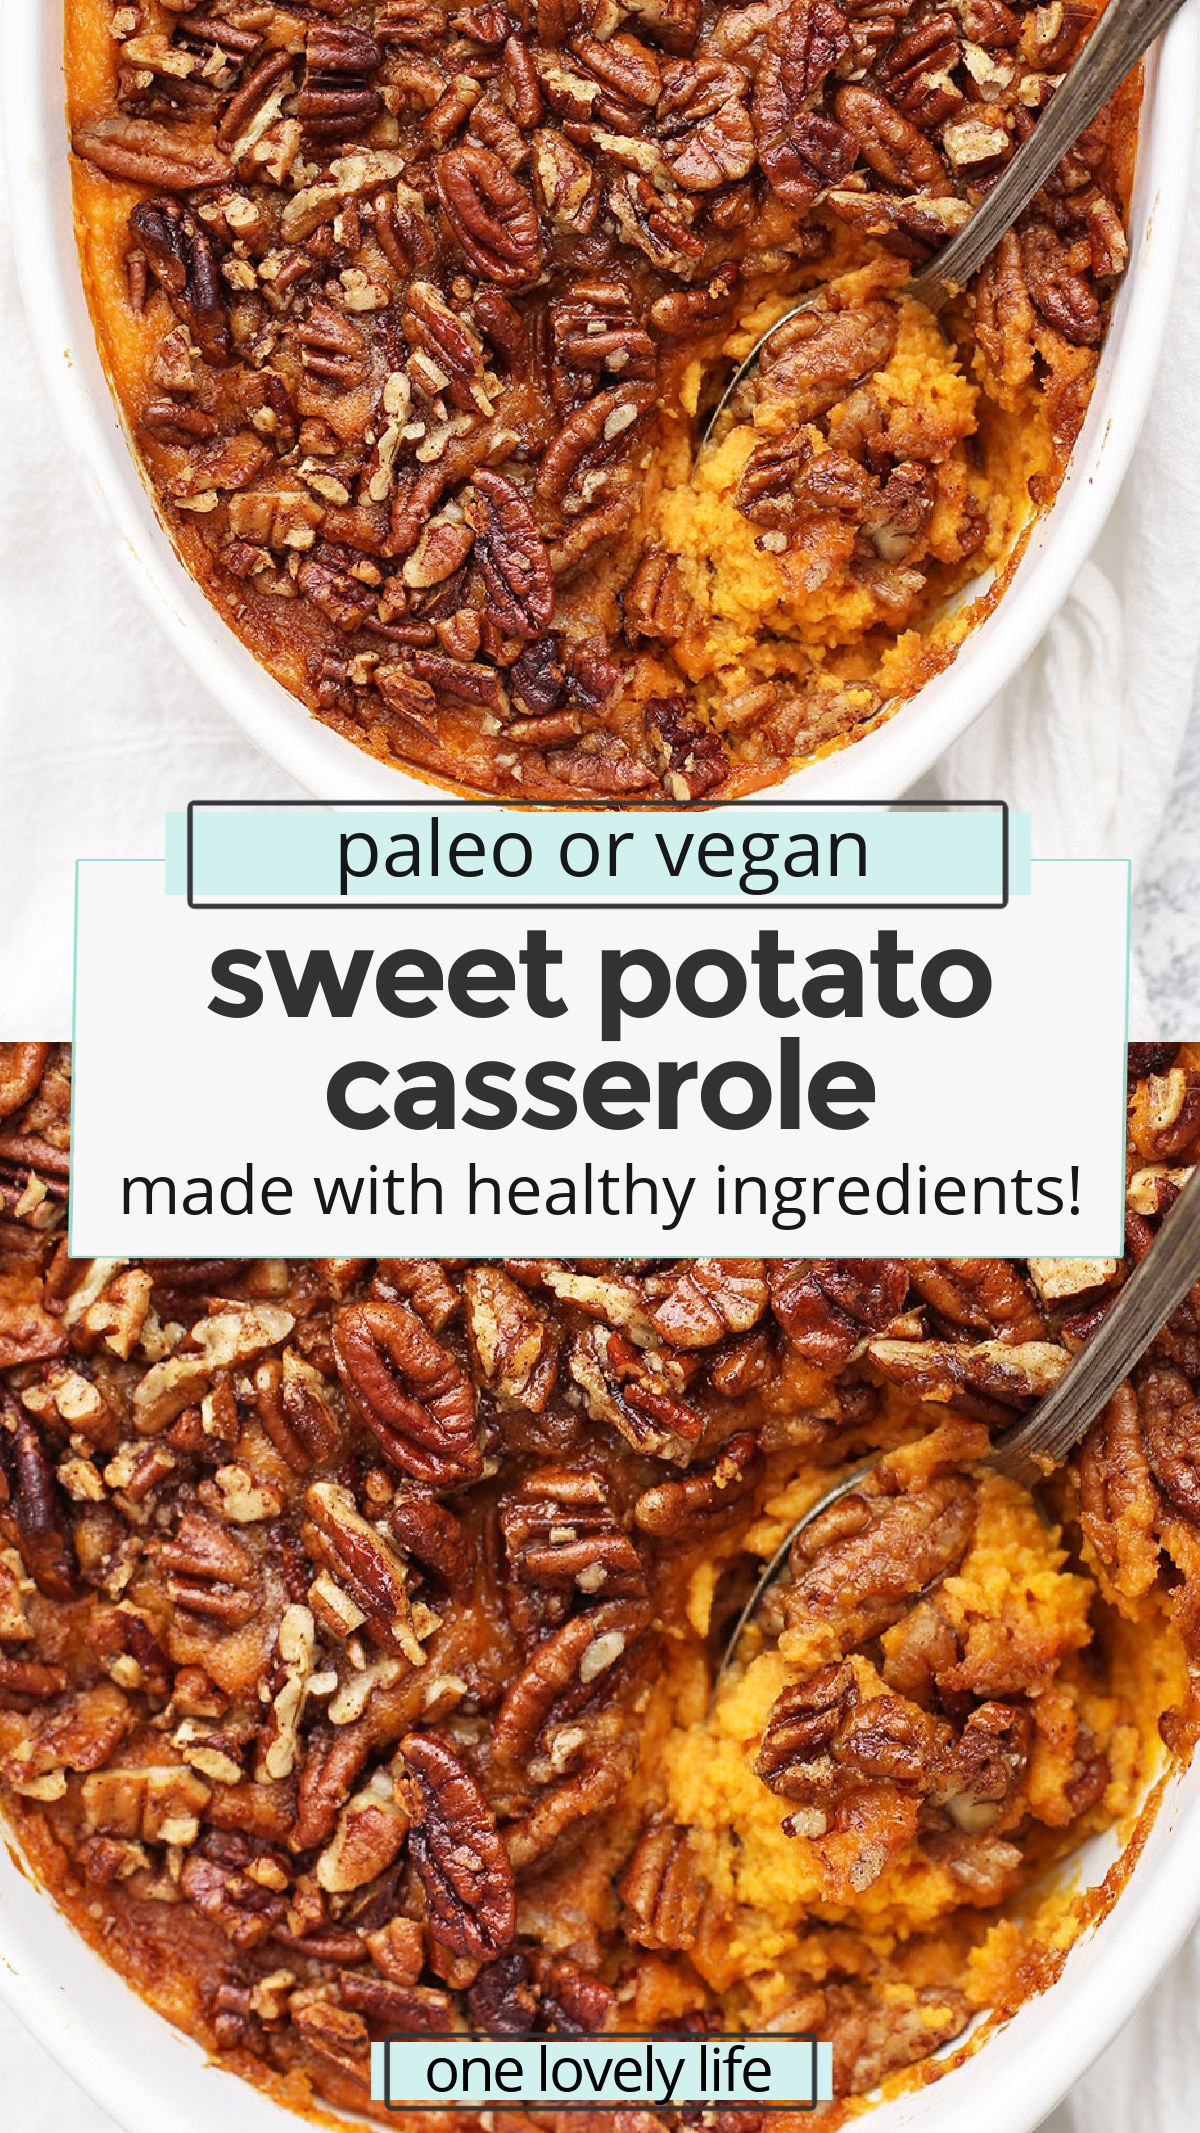 Paleo (or Vegan!) Sweet Potato Casserole - Gluten free, naturally sweetened, and totally delicious! // Vegan sweet potato casserole recipe // paleo sweet potato casserole recipe // healthy sweet potato casserole recipe // dairy free sweet potato casserole recipe // gluten free sweet potato casserole recipe // Thanksgiving side dish // Paleo thanksgiving // healthy thanksgiving recipe